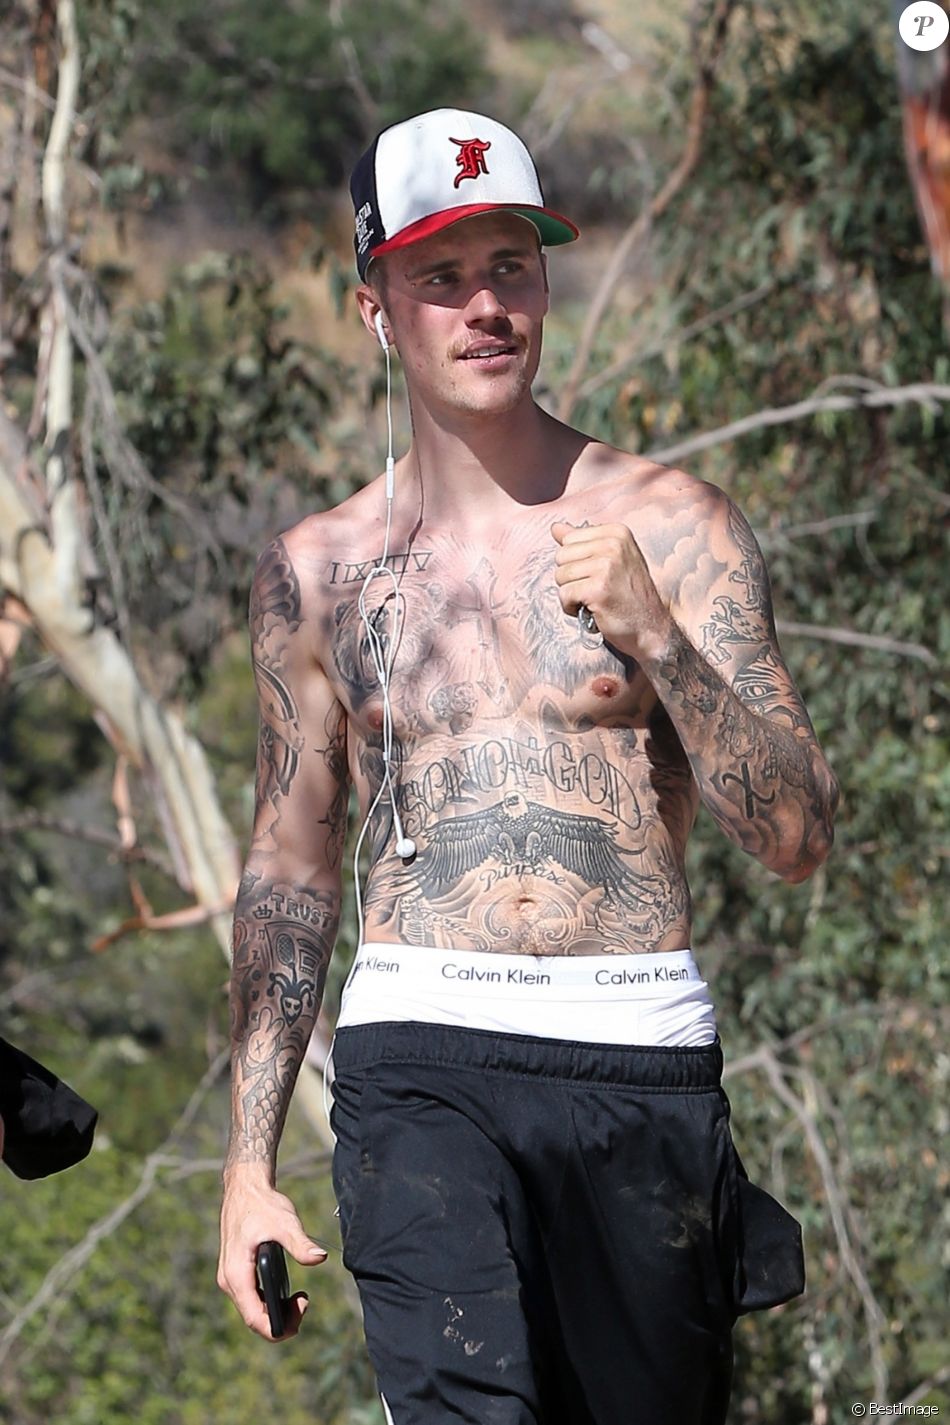 https://static1.purepeople.com/articles/9/37/25/39/@/5375966-justin-bieber-se-balade-topless-a-runyon-950x0-1.jpg